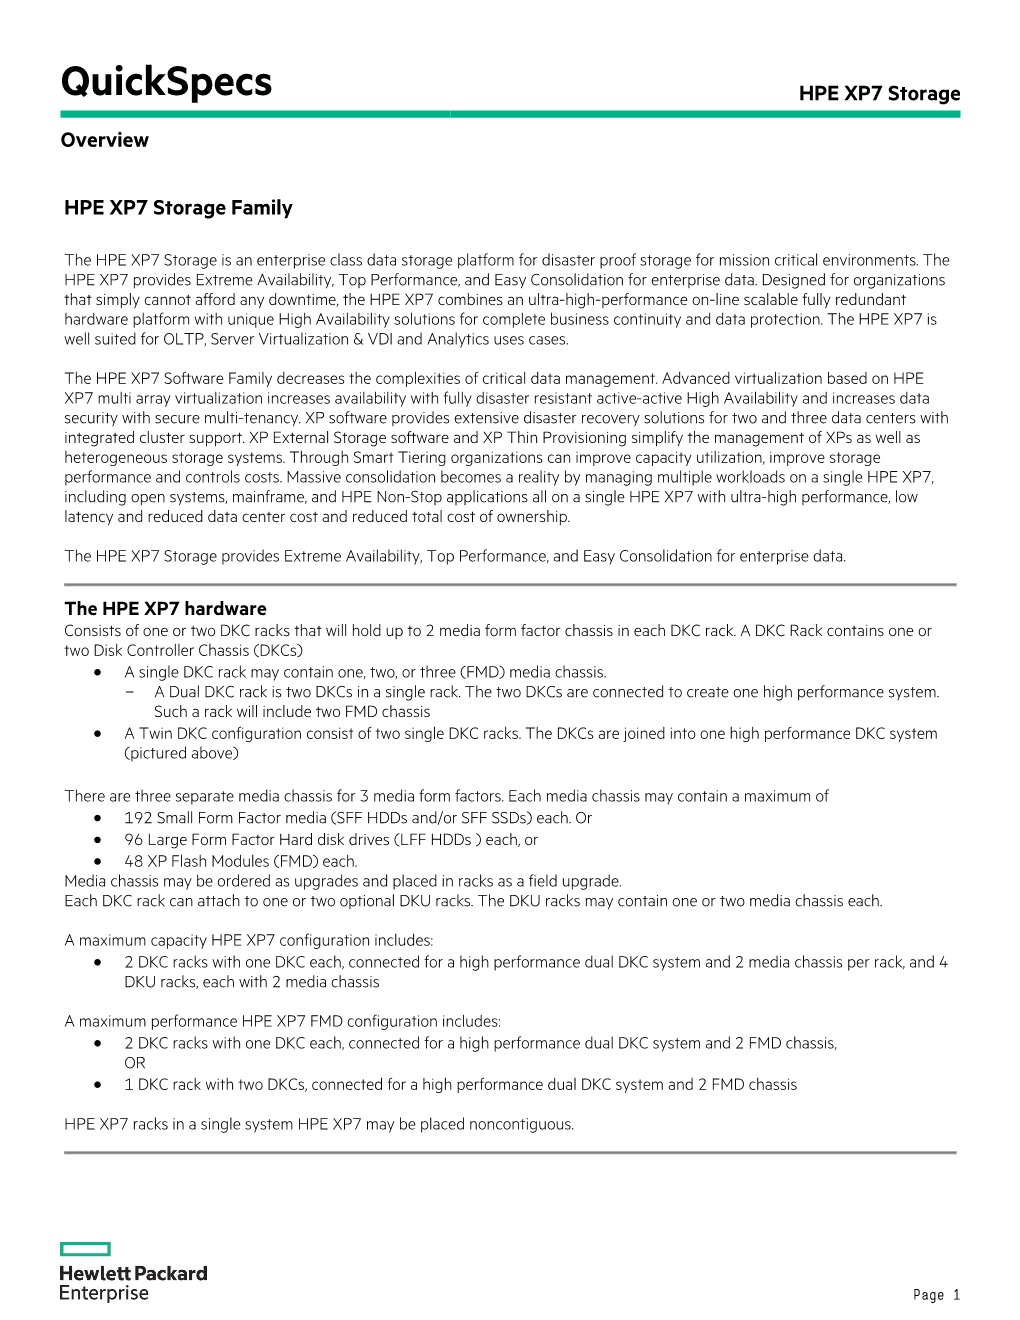 HPE XP7 Storage Overview